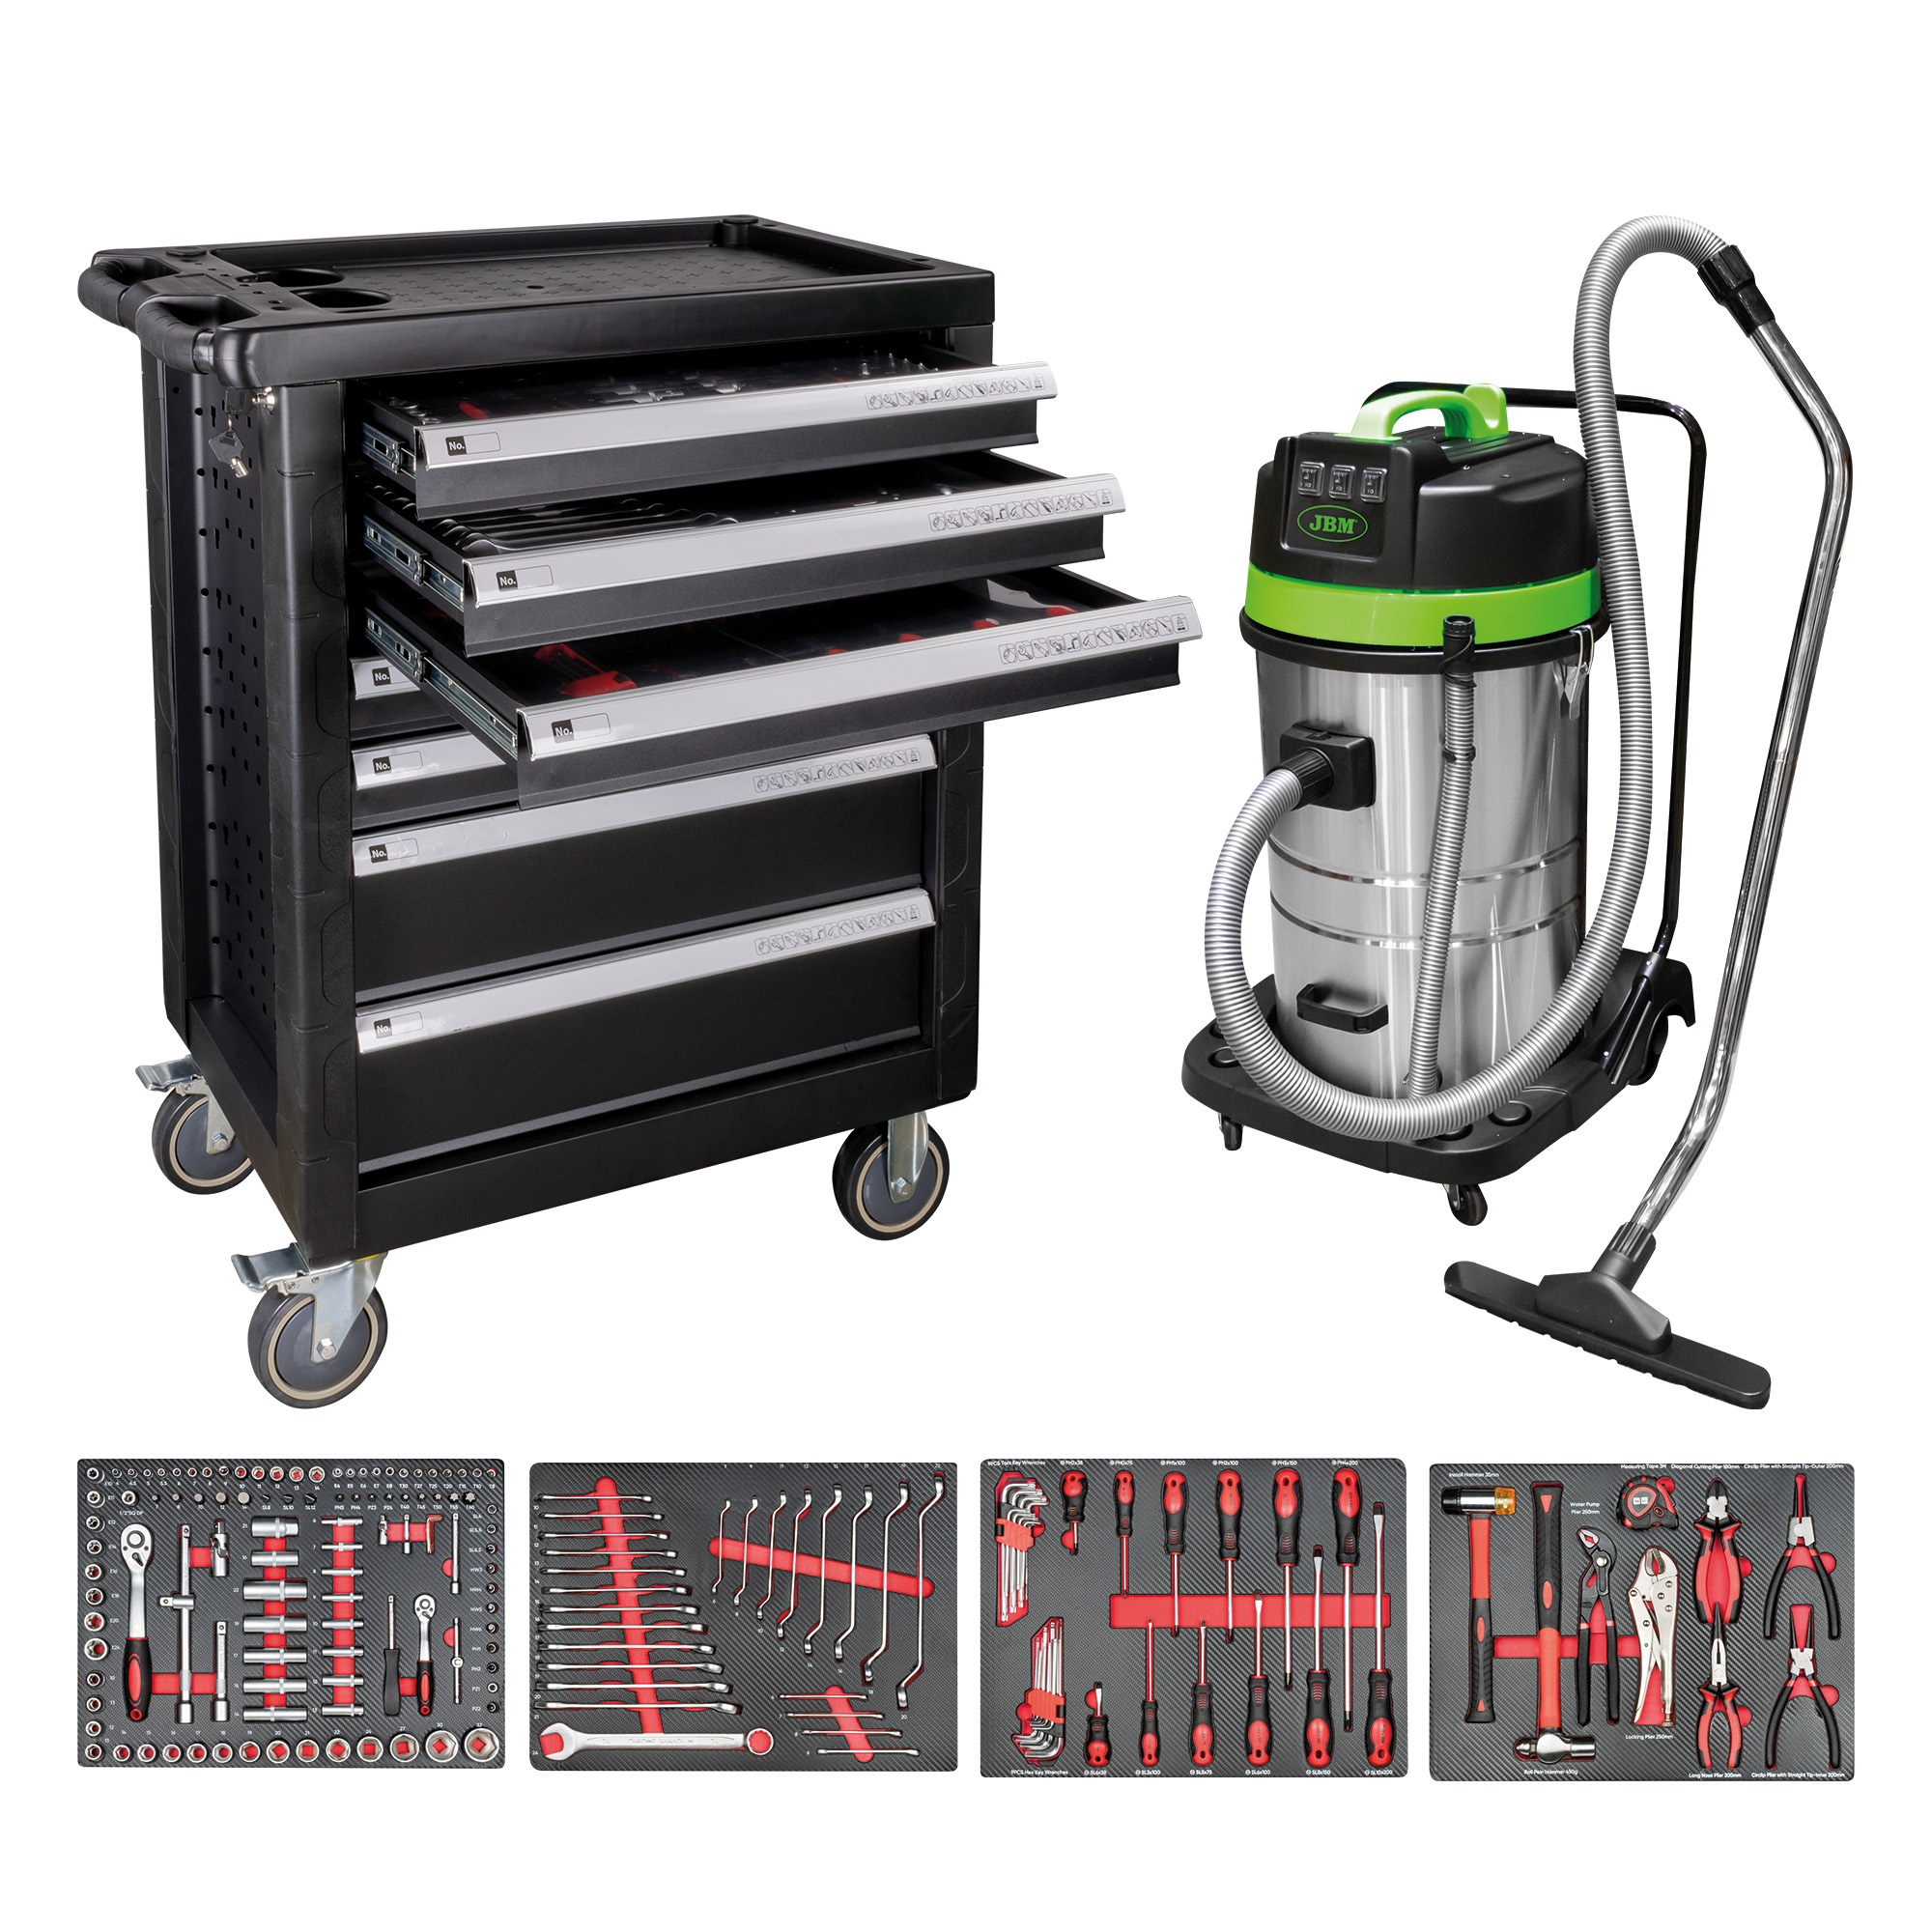 43904 7 DRAWER CABINET + 51838 80 LITRE VACUUM CLEANER (DRY AND WET)